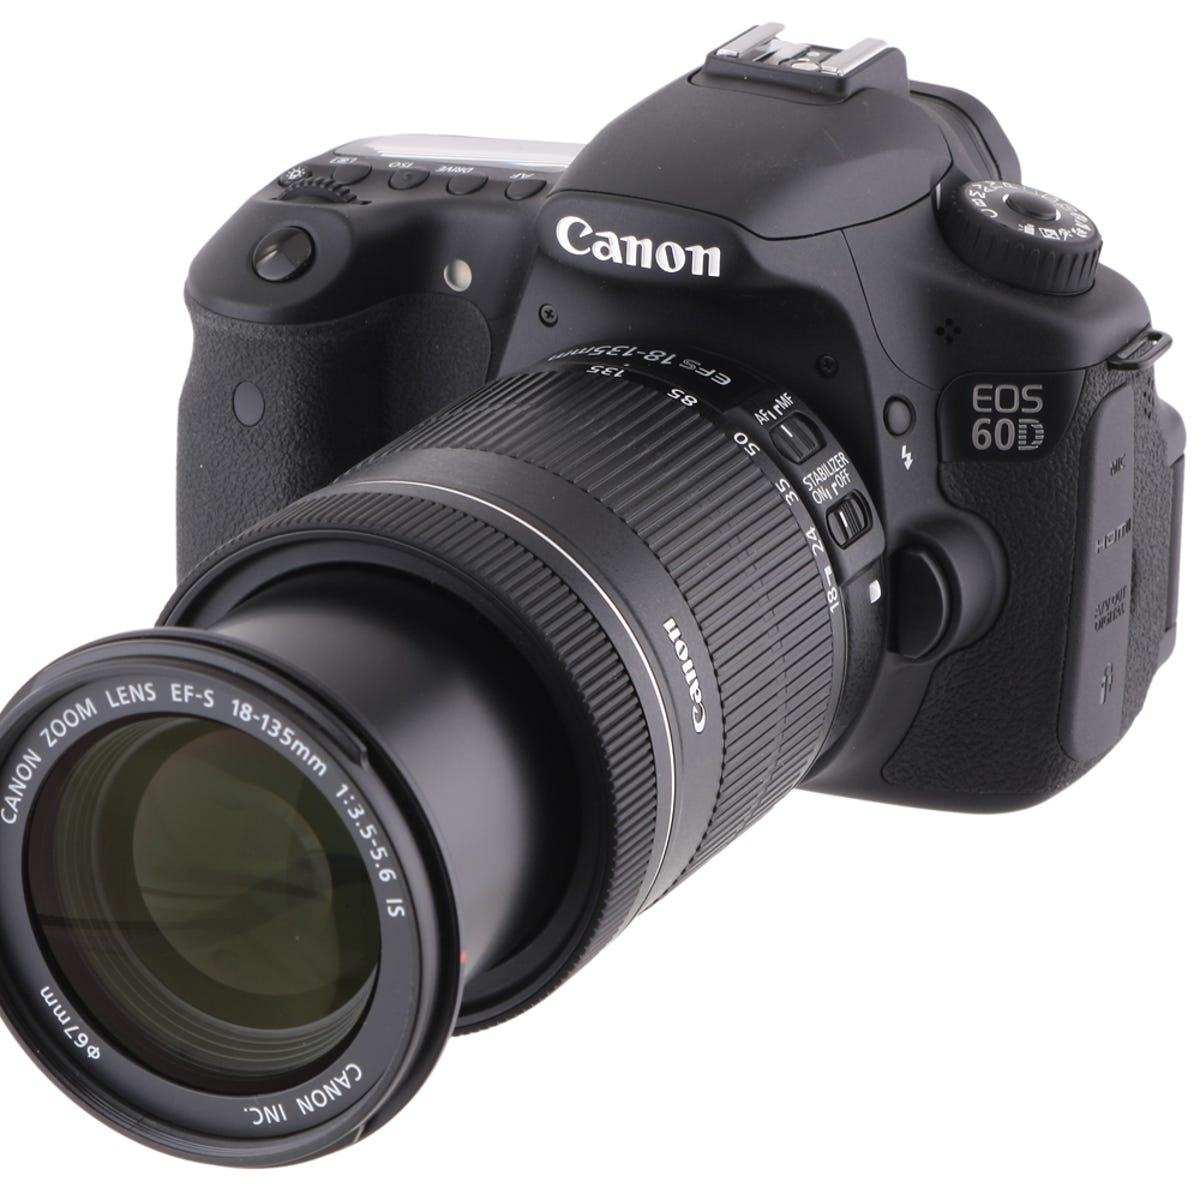 Uitstroom Specialiteit Omgaan Canon EOS 60D review: Canon EOS 60D - CNET